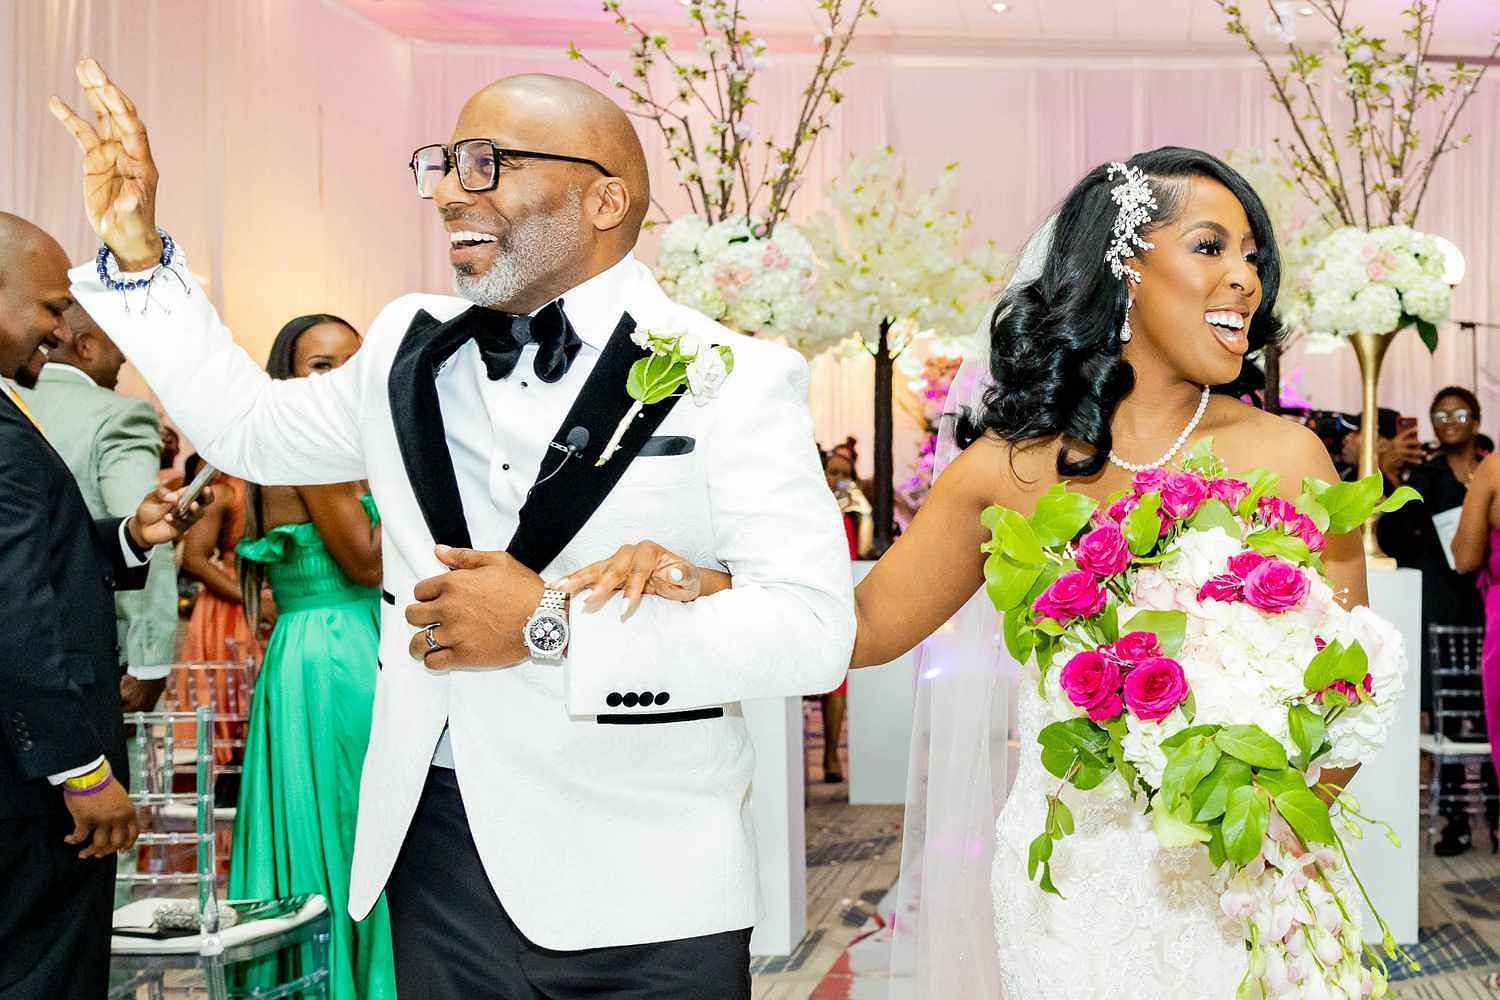 Tea and Gregory got married during Married to Medicine Season 10 episode 4. (Image via Bravo)